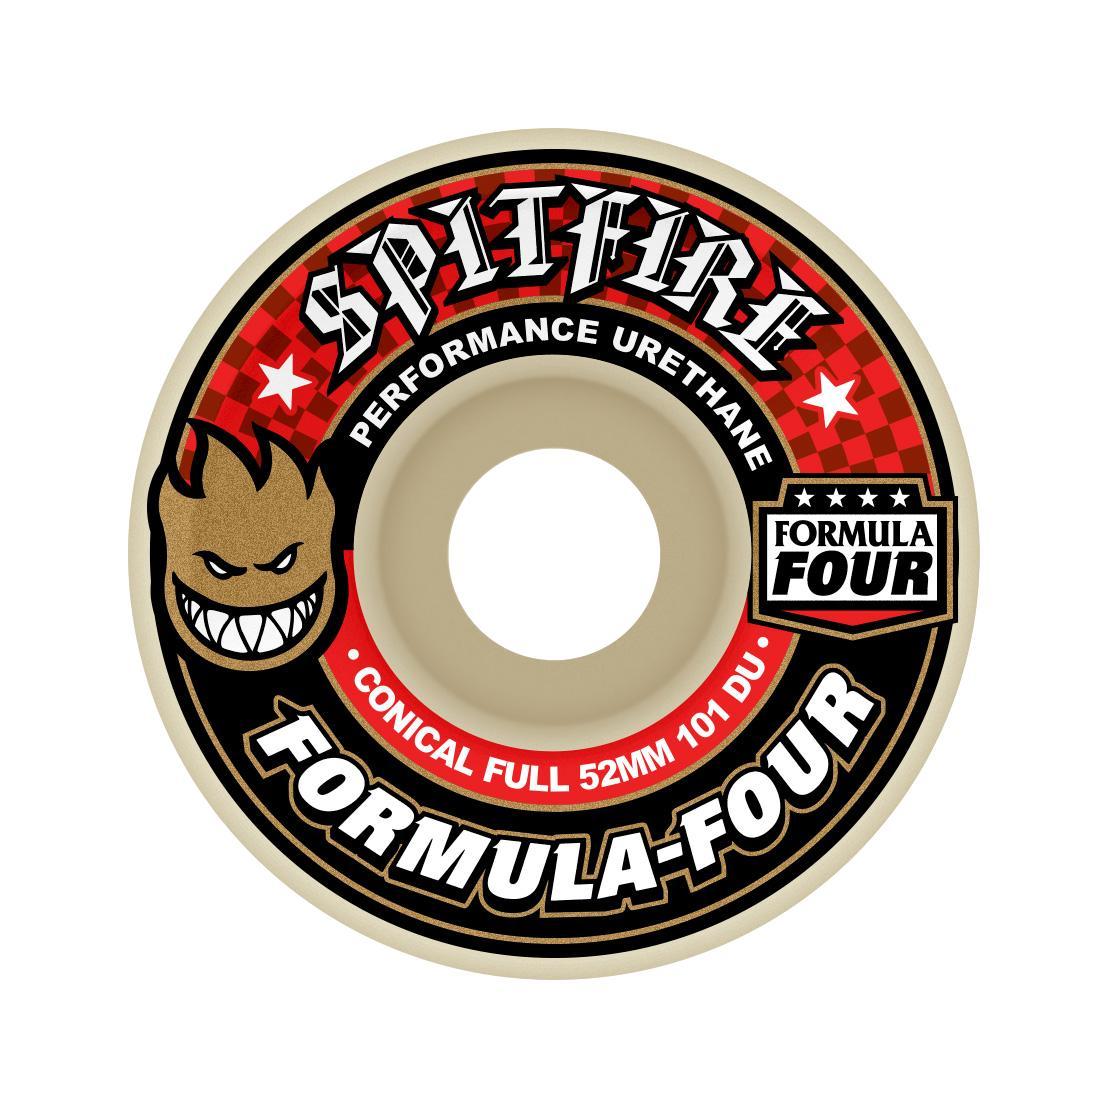 Spitfire F4 101a Conical Full 52mm White Red - Venue Skateboards